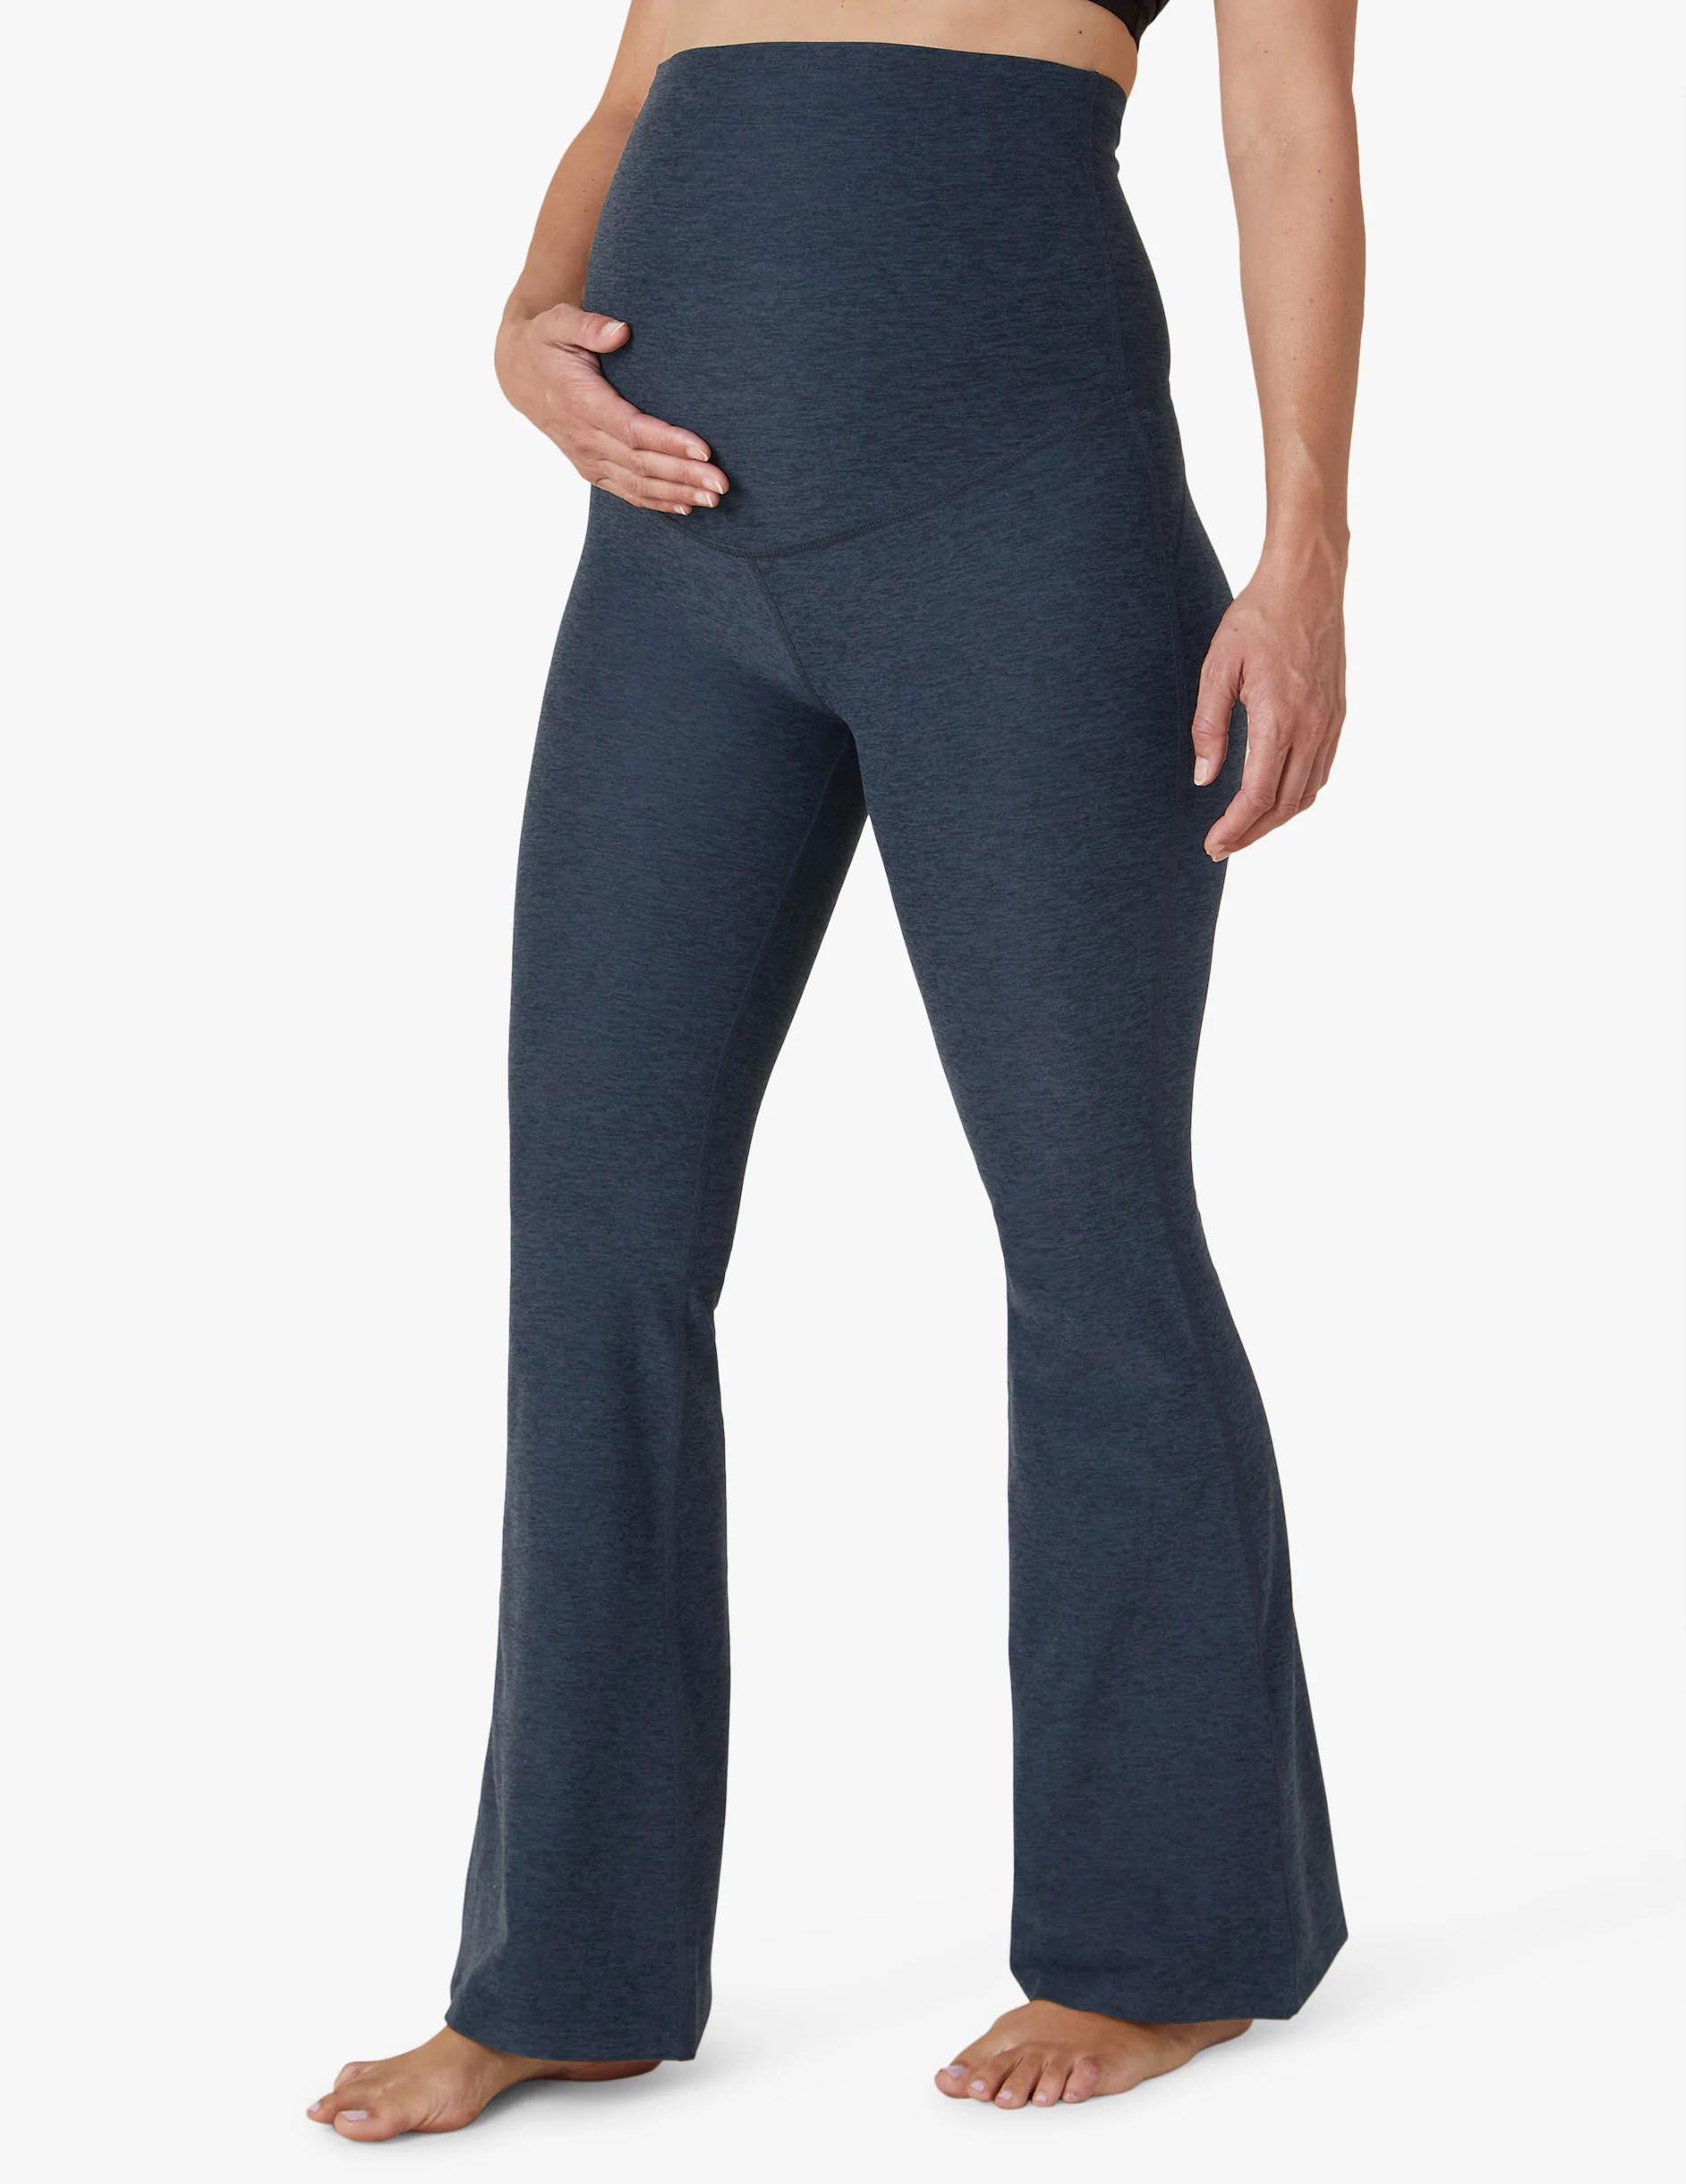 13 of the Best Flared Leggings and Yoga Pants